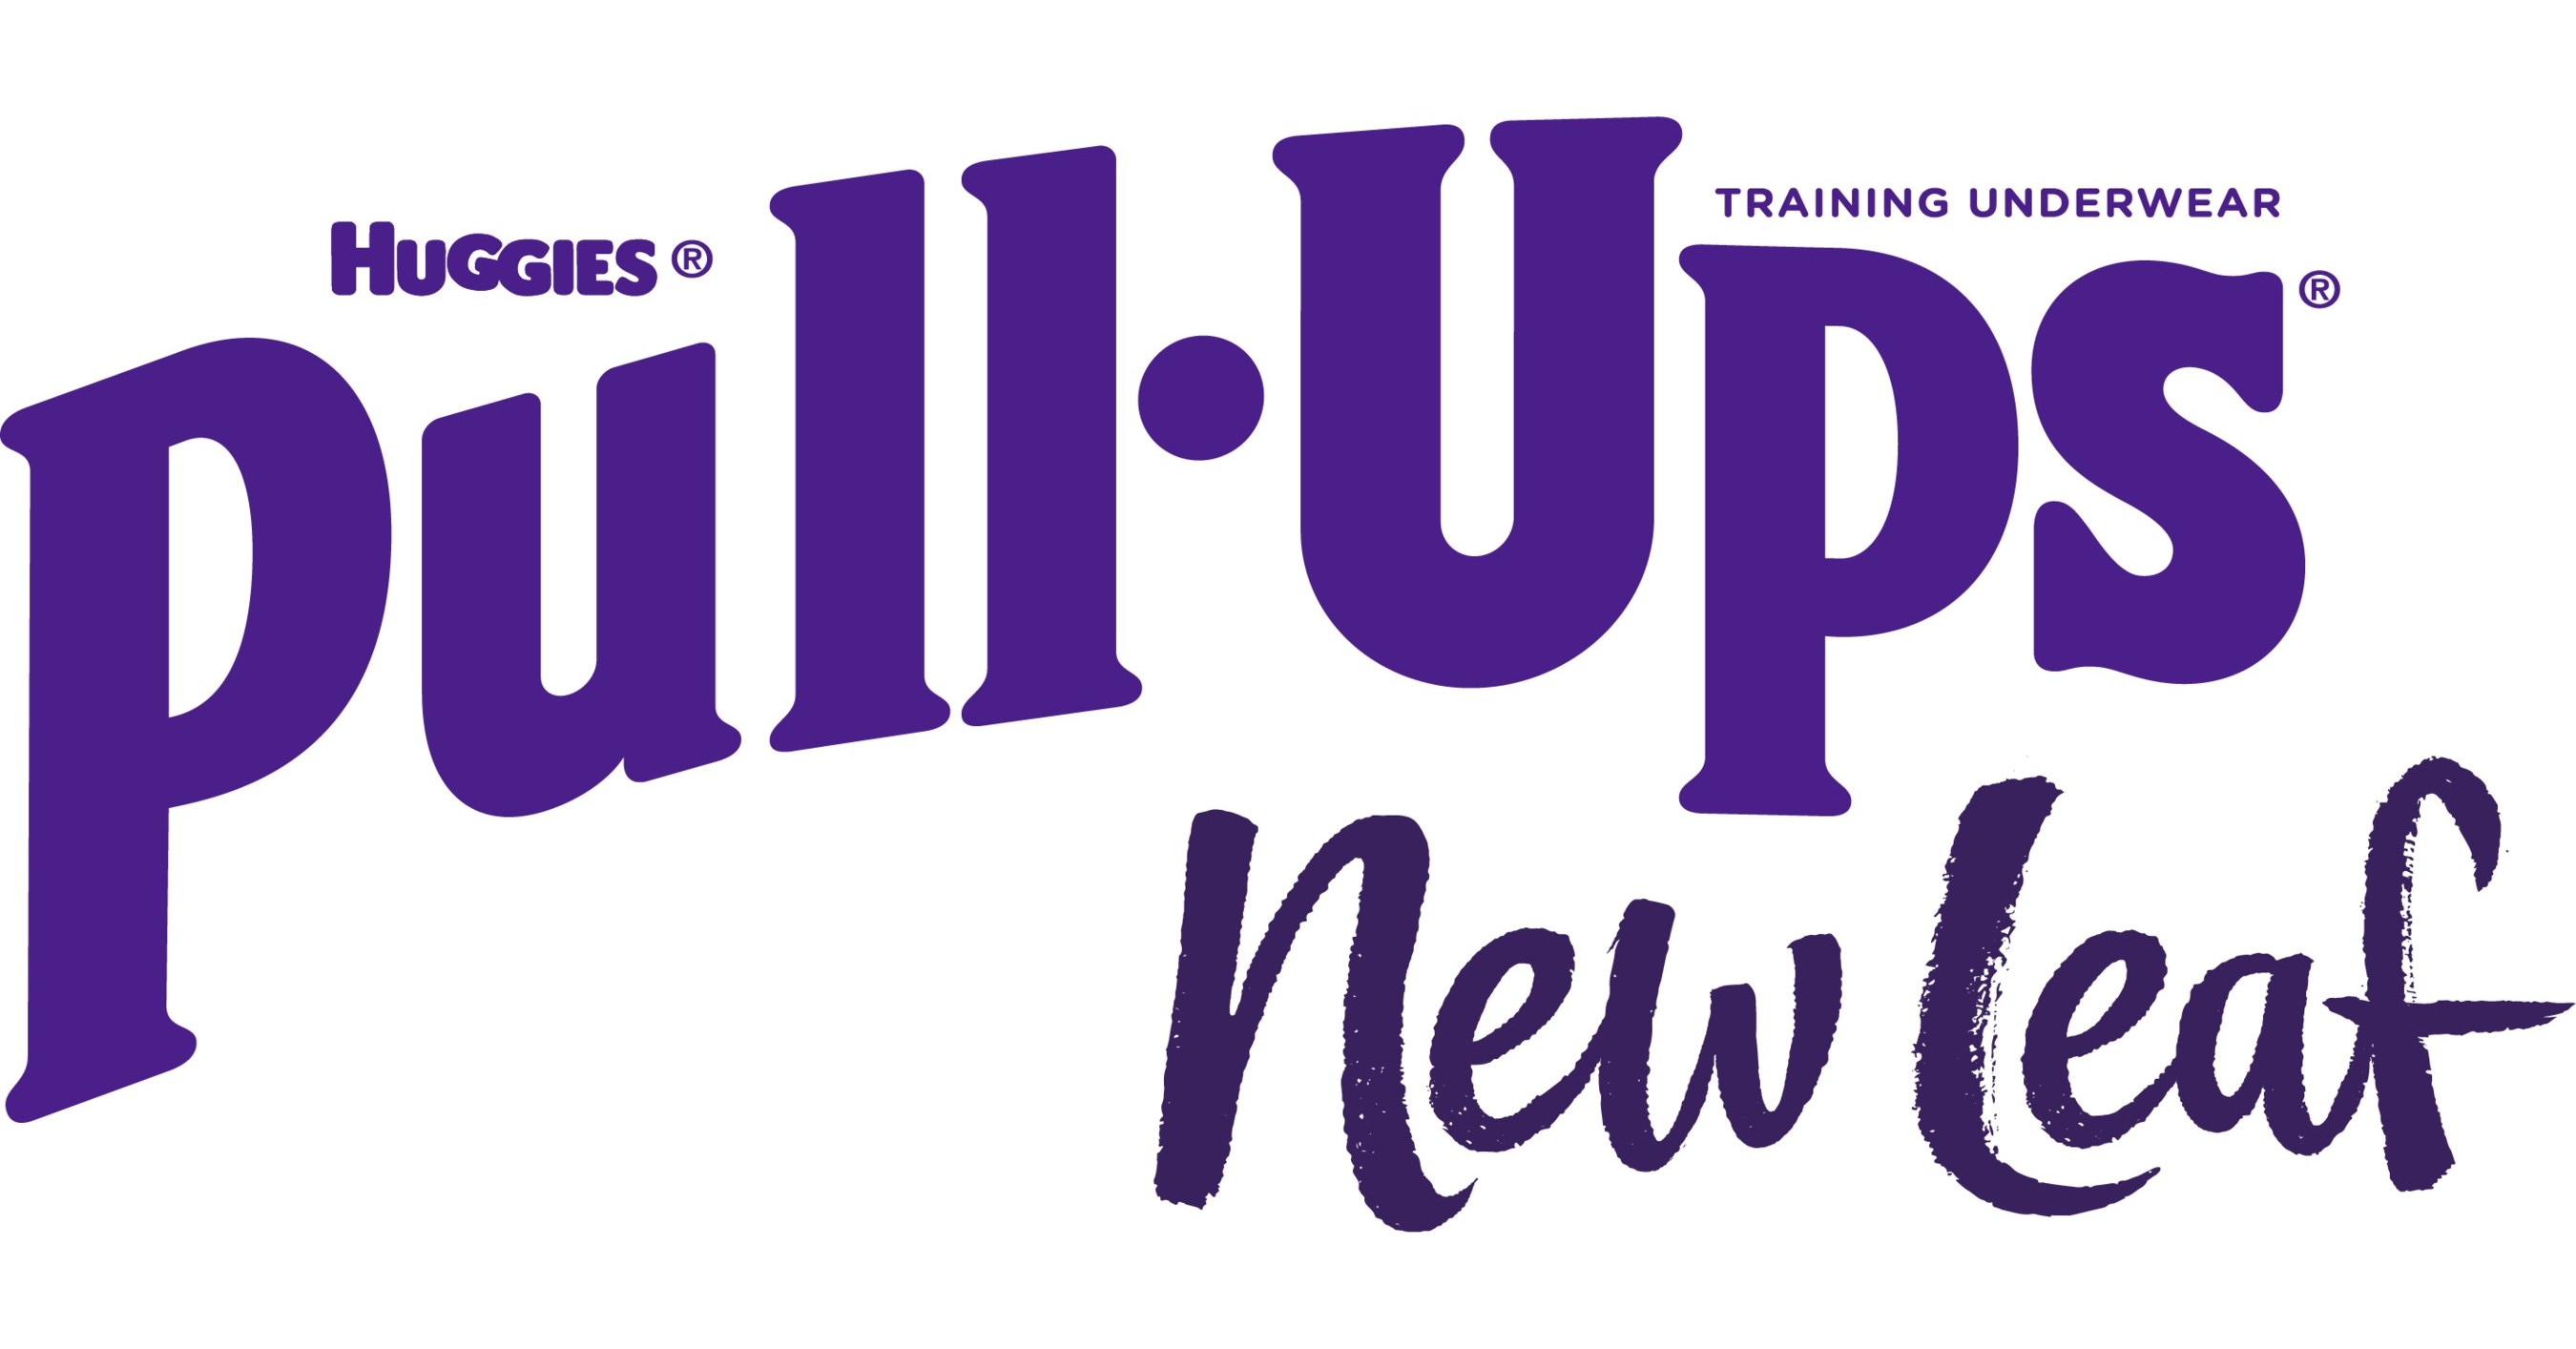 Pull-Ups® Introduces New Leaf™, a Super Soft Training Underwear with  Plant-Based* Ingredients featuring Exclusive Designs from Disney's Frozen  II